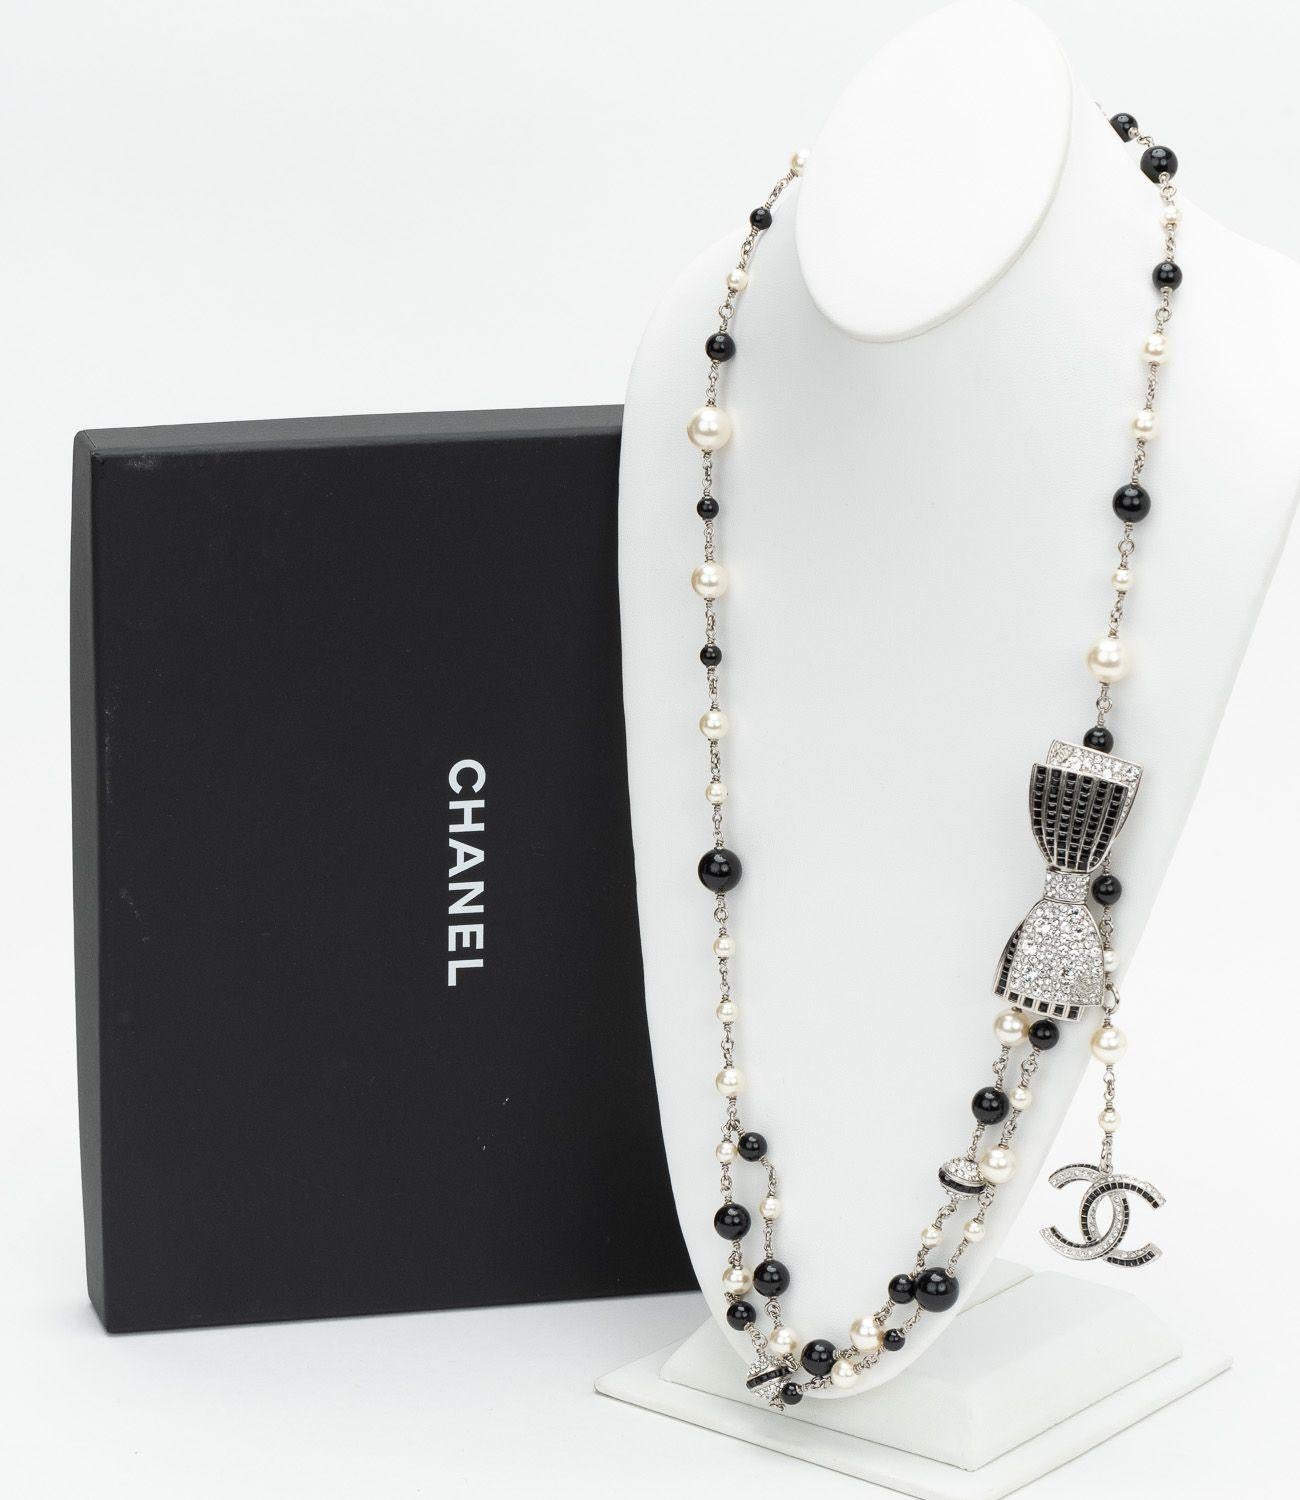 Chanel mint condition long crystal and black necklace with bow detail. Can be worn single or double. Collection spring 2017. Comes with original box.